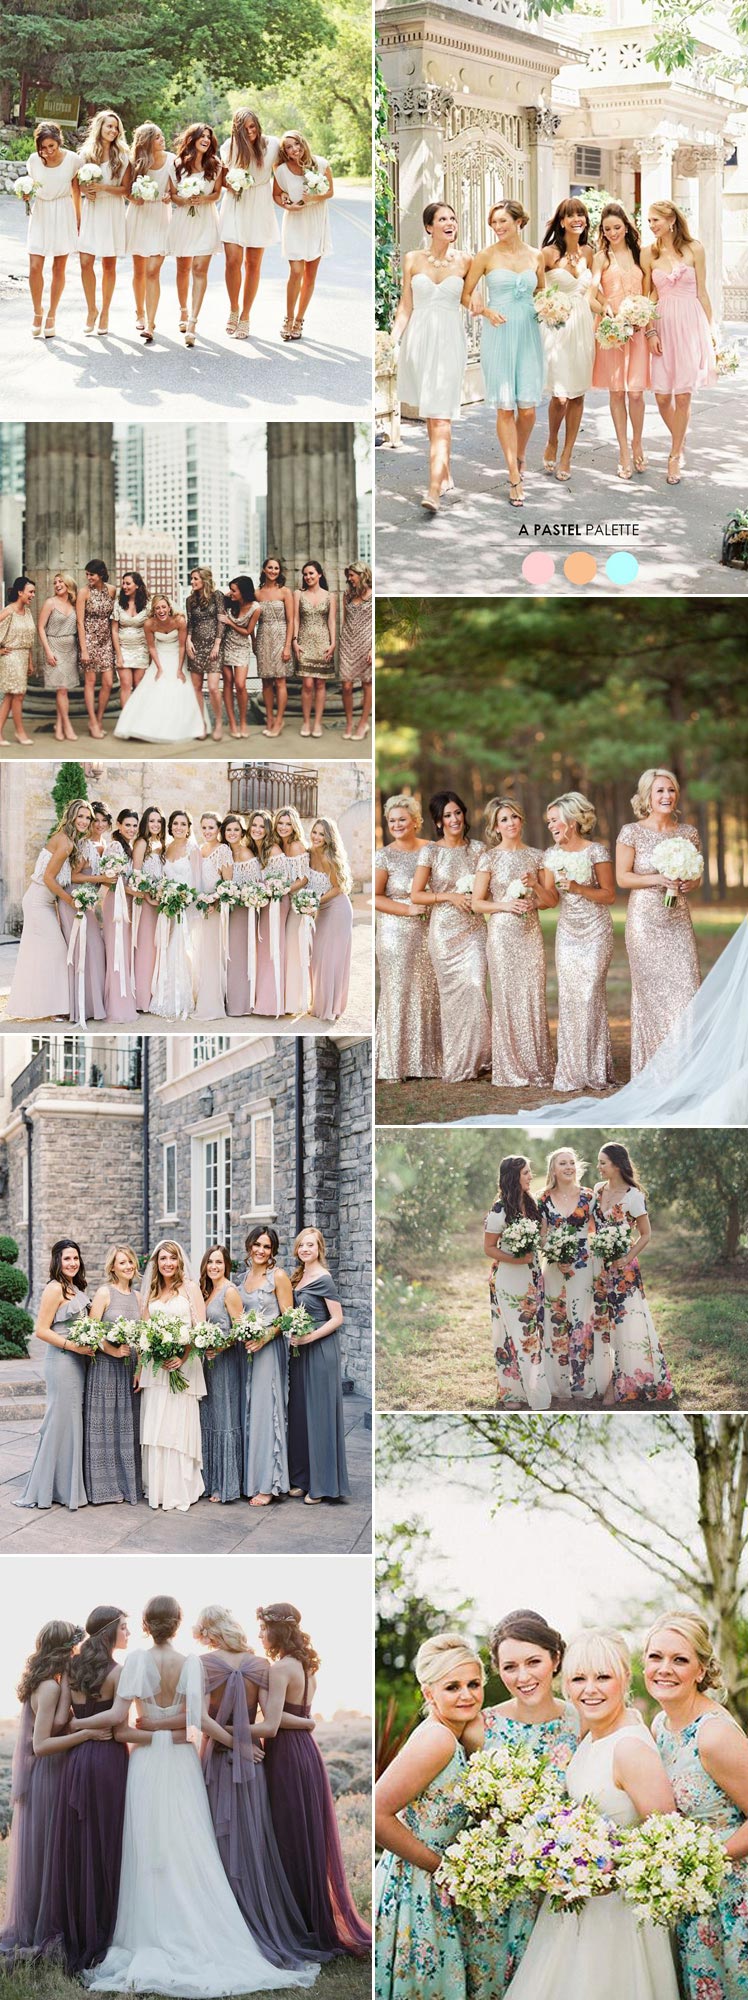 Bridesmaid dress ideas for every style